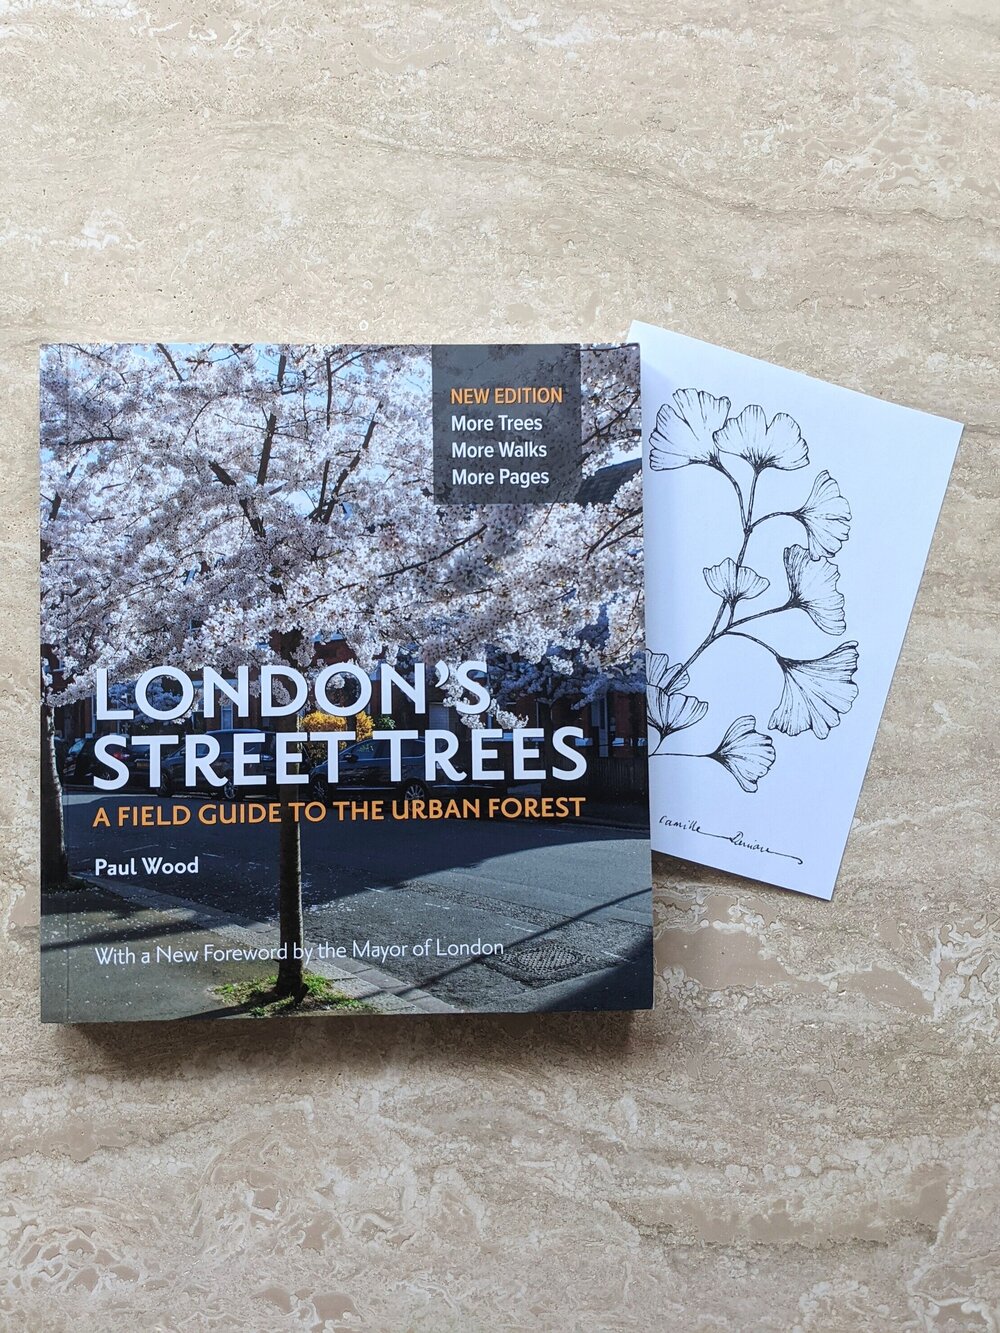 'London's Street Trees' - signed copy / Ginkgo Branch limited edition card by Project Roots